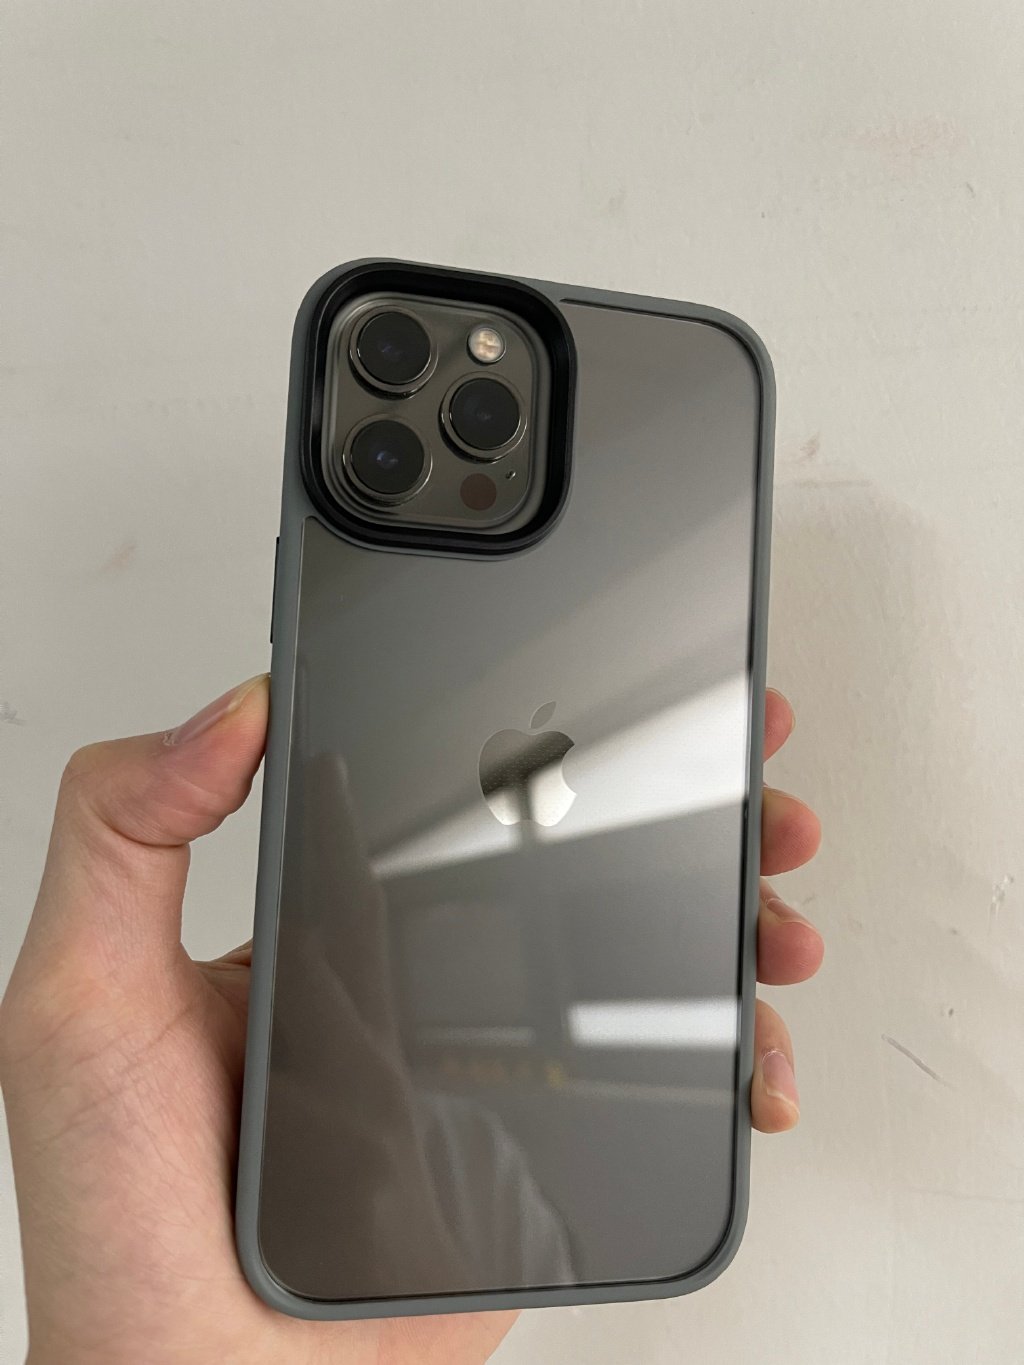 Alleged image of iPhone 13 Pro case shows a much larger camera module